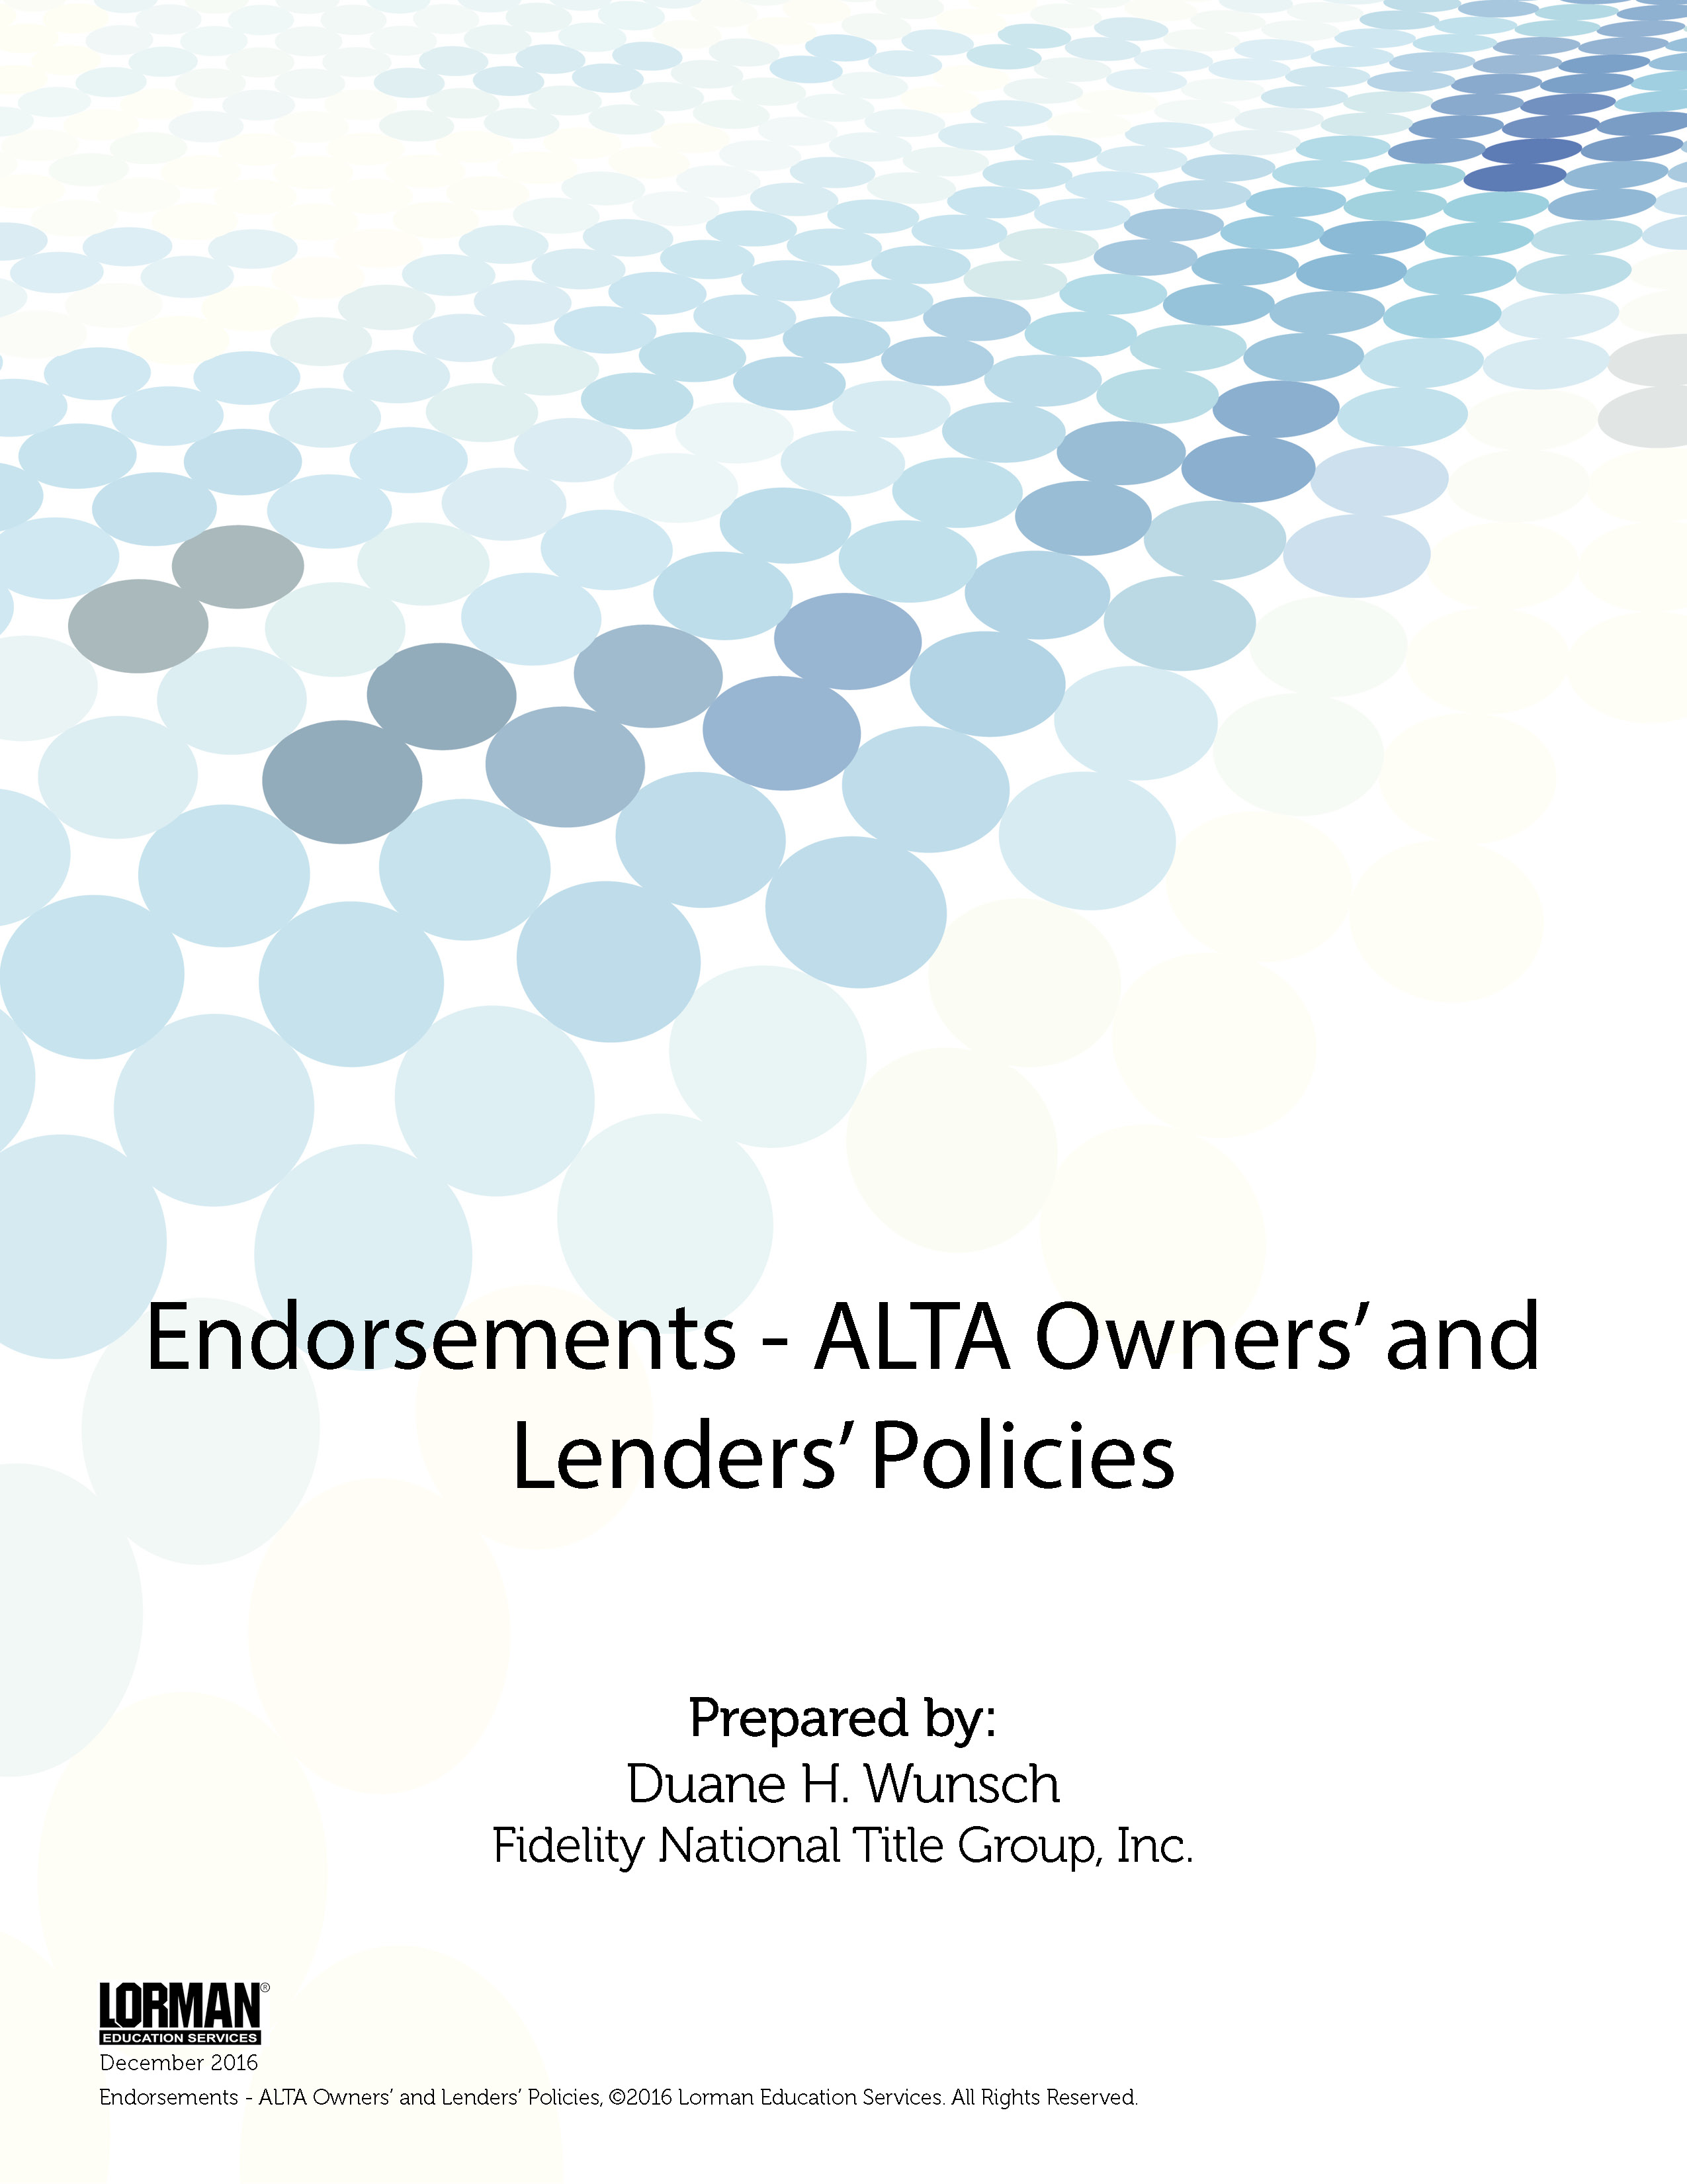 Endorsements - ALTA Owners’ and Lenders’ Policies